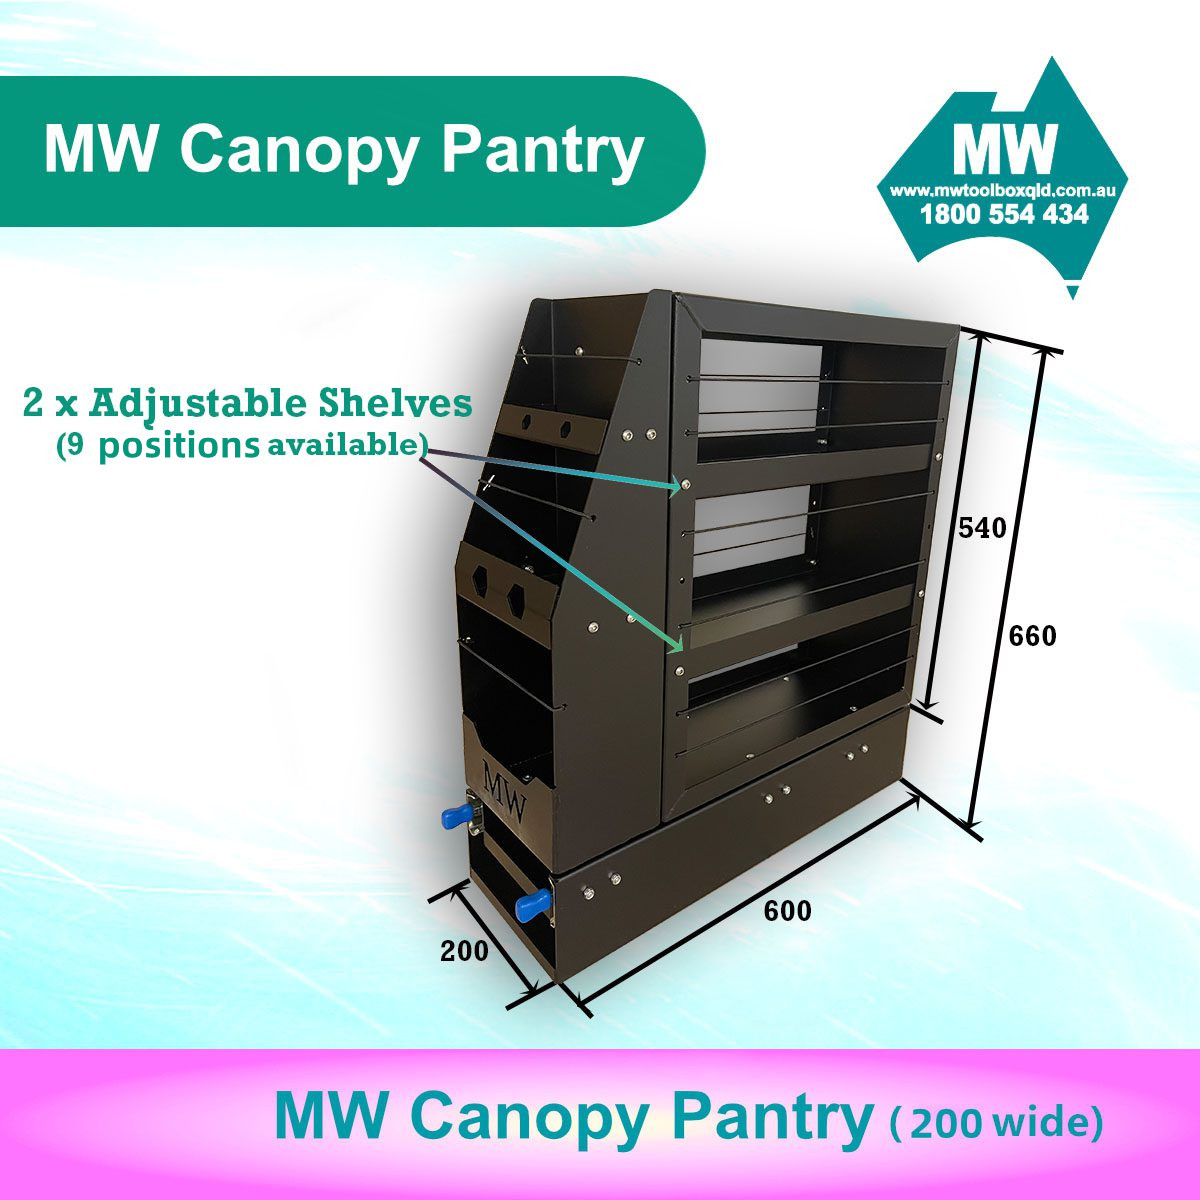 Canopy-Pantry-300mm-Wide-Canopy-Drawer-3-1 (1)